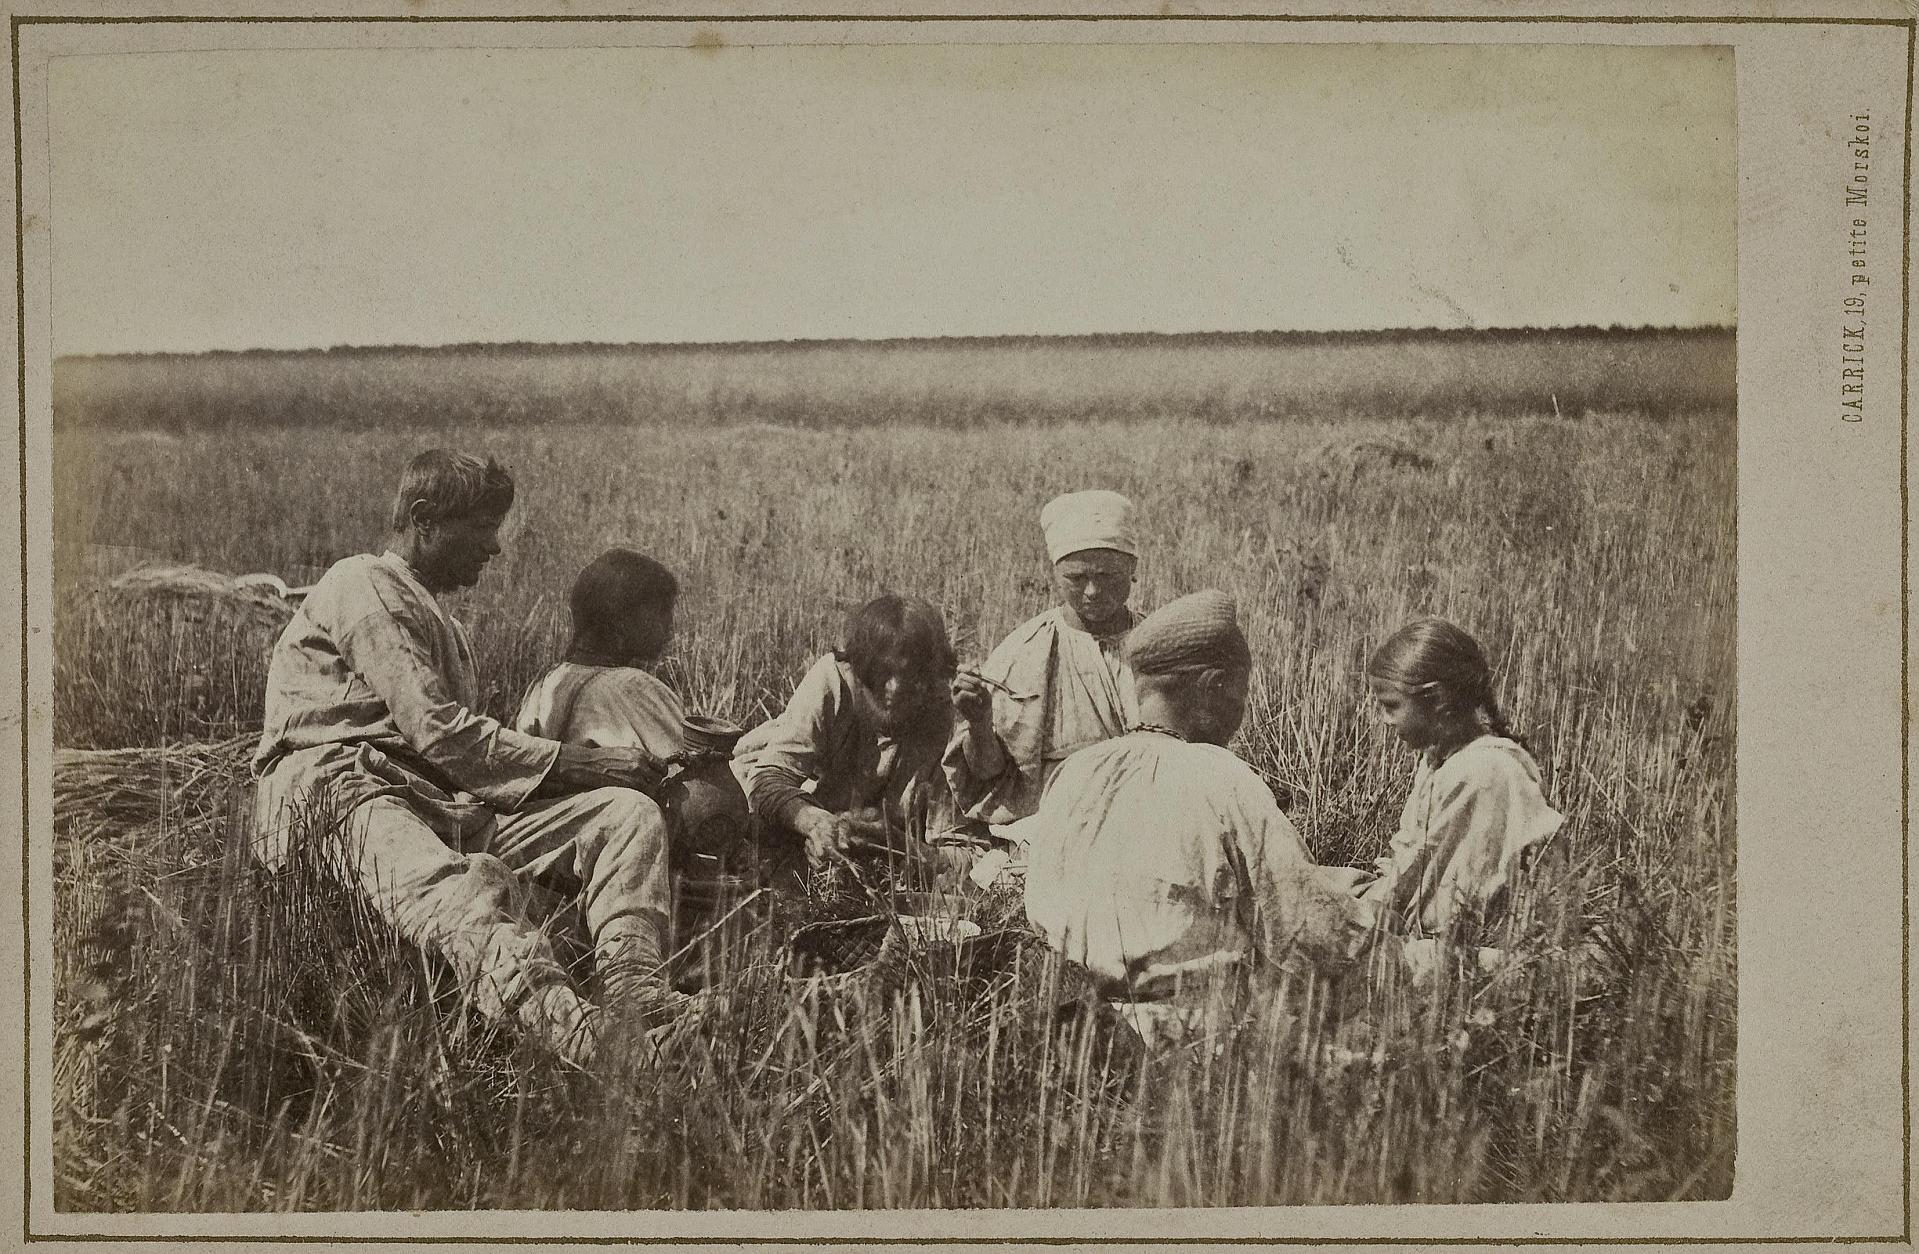 Peasant Midday Meal in a Field. Photographed by William Carrick, Imperial Russia, 1860s.jpg